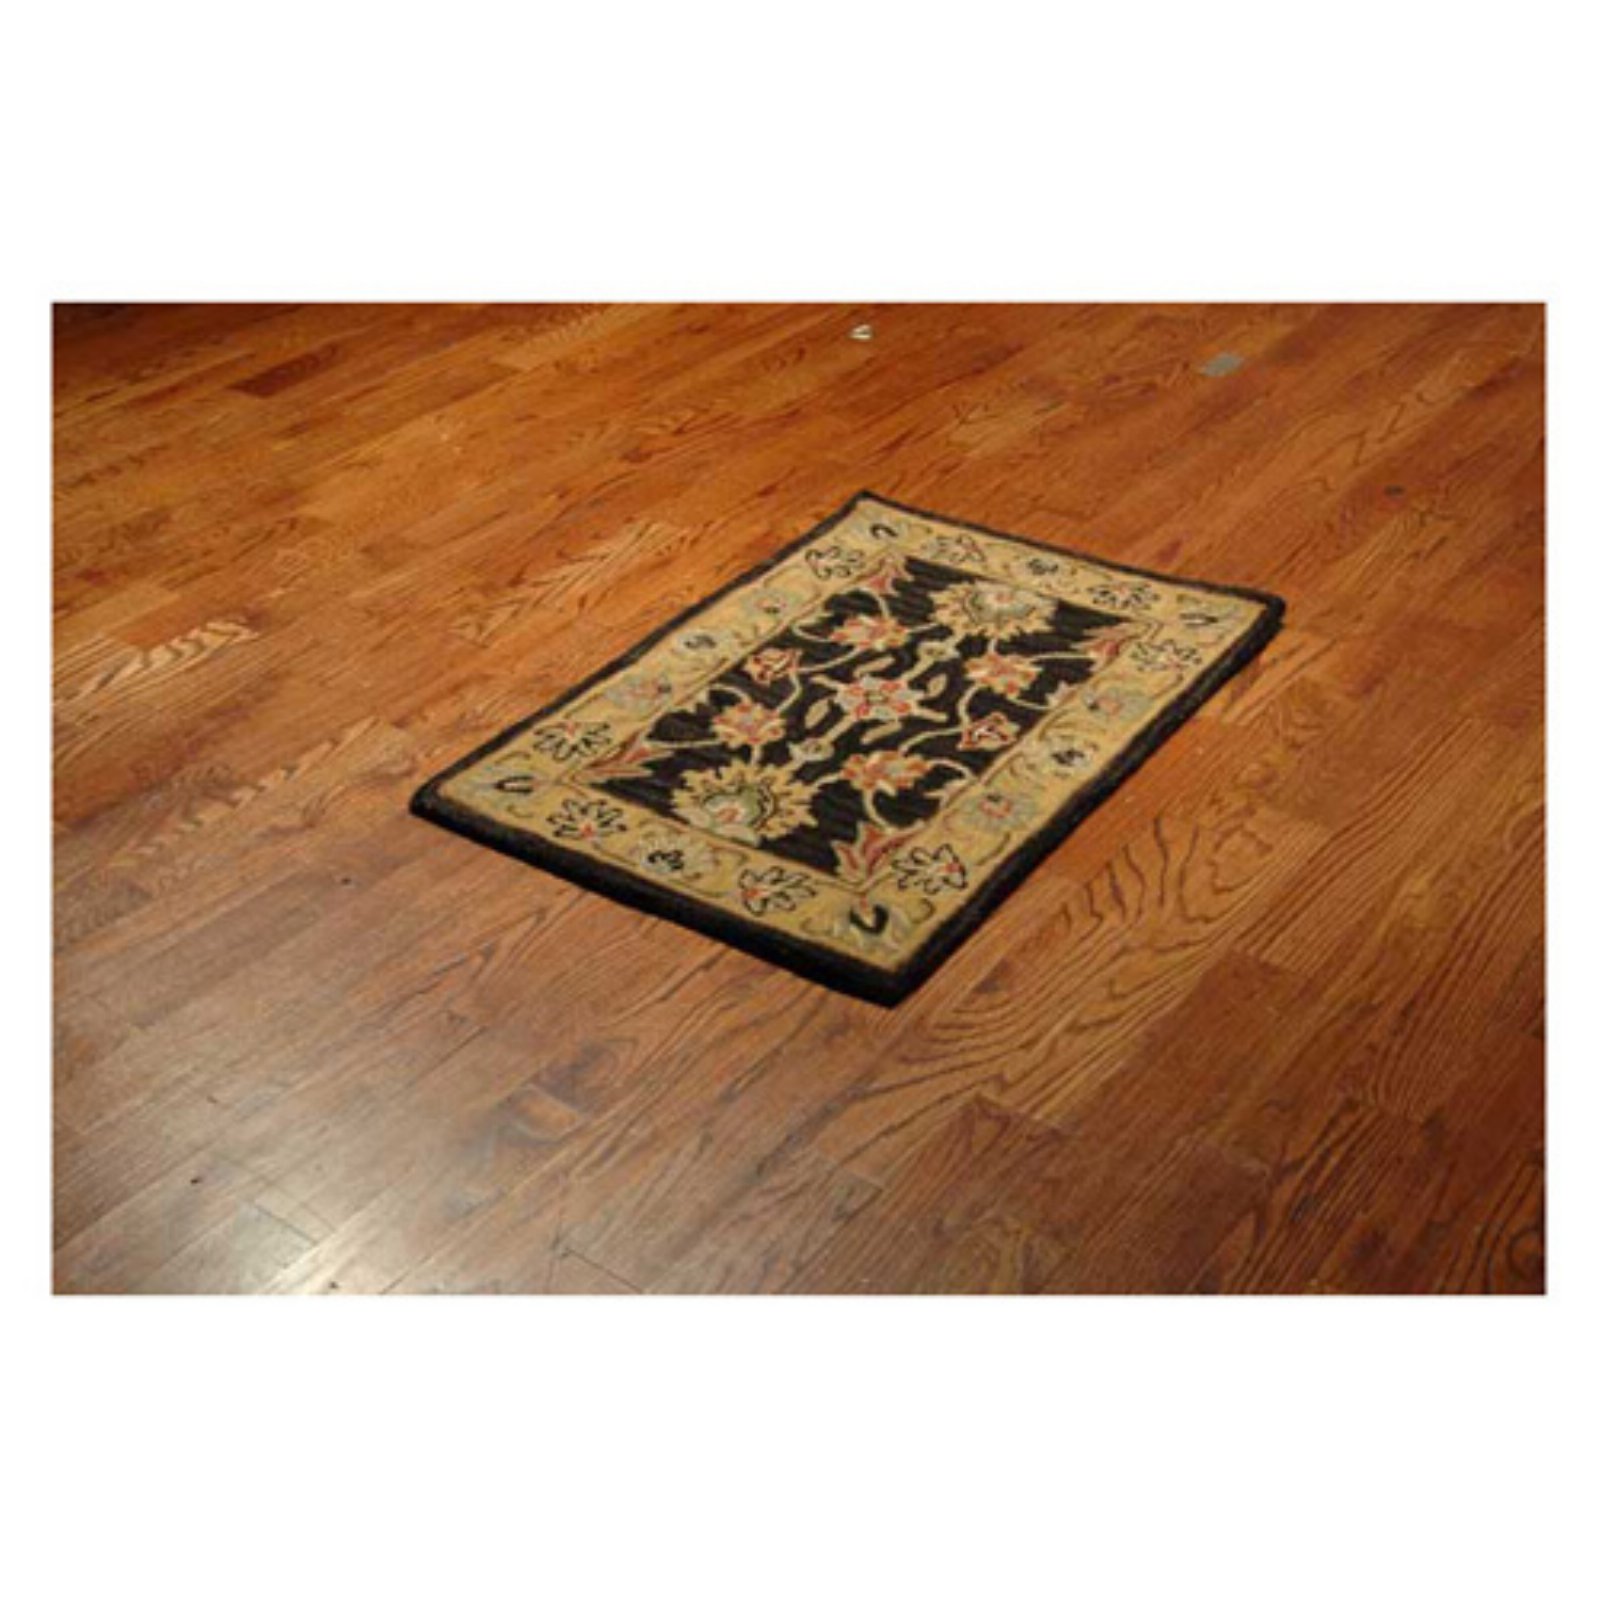 SAFAVIEH Heritage Regis Traditional Wool Area Rug, Charcoal/Gold, 5' x 8' - image 3 of 10